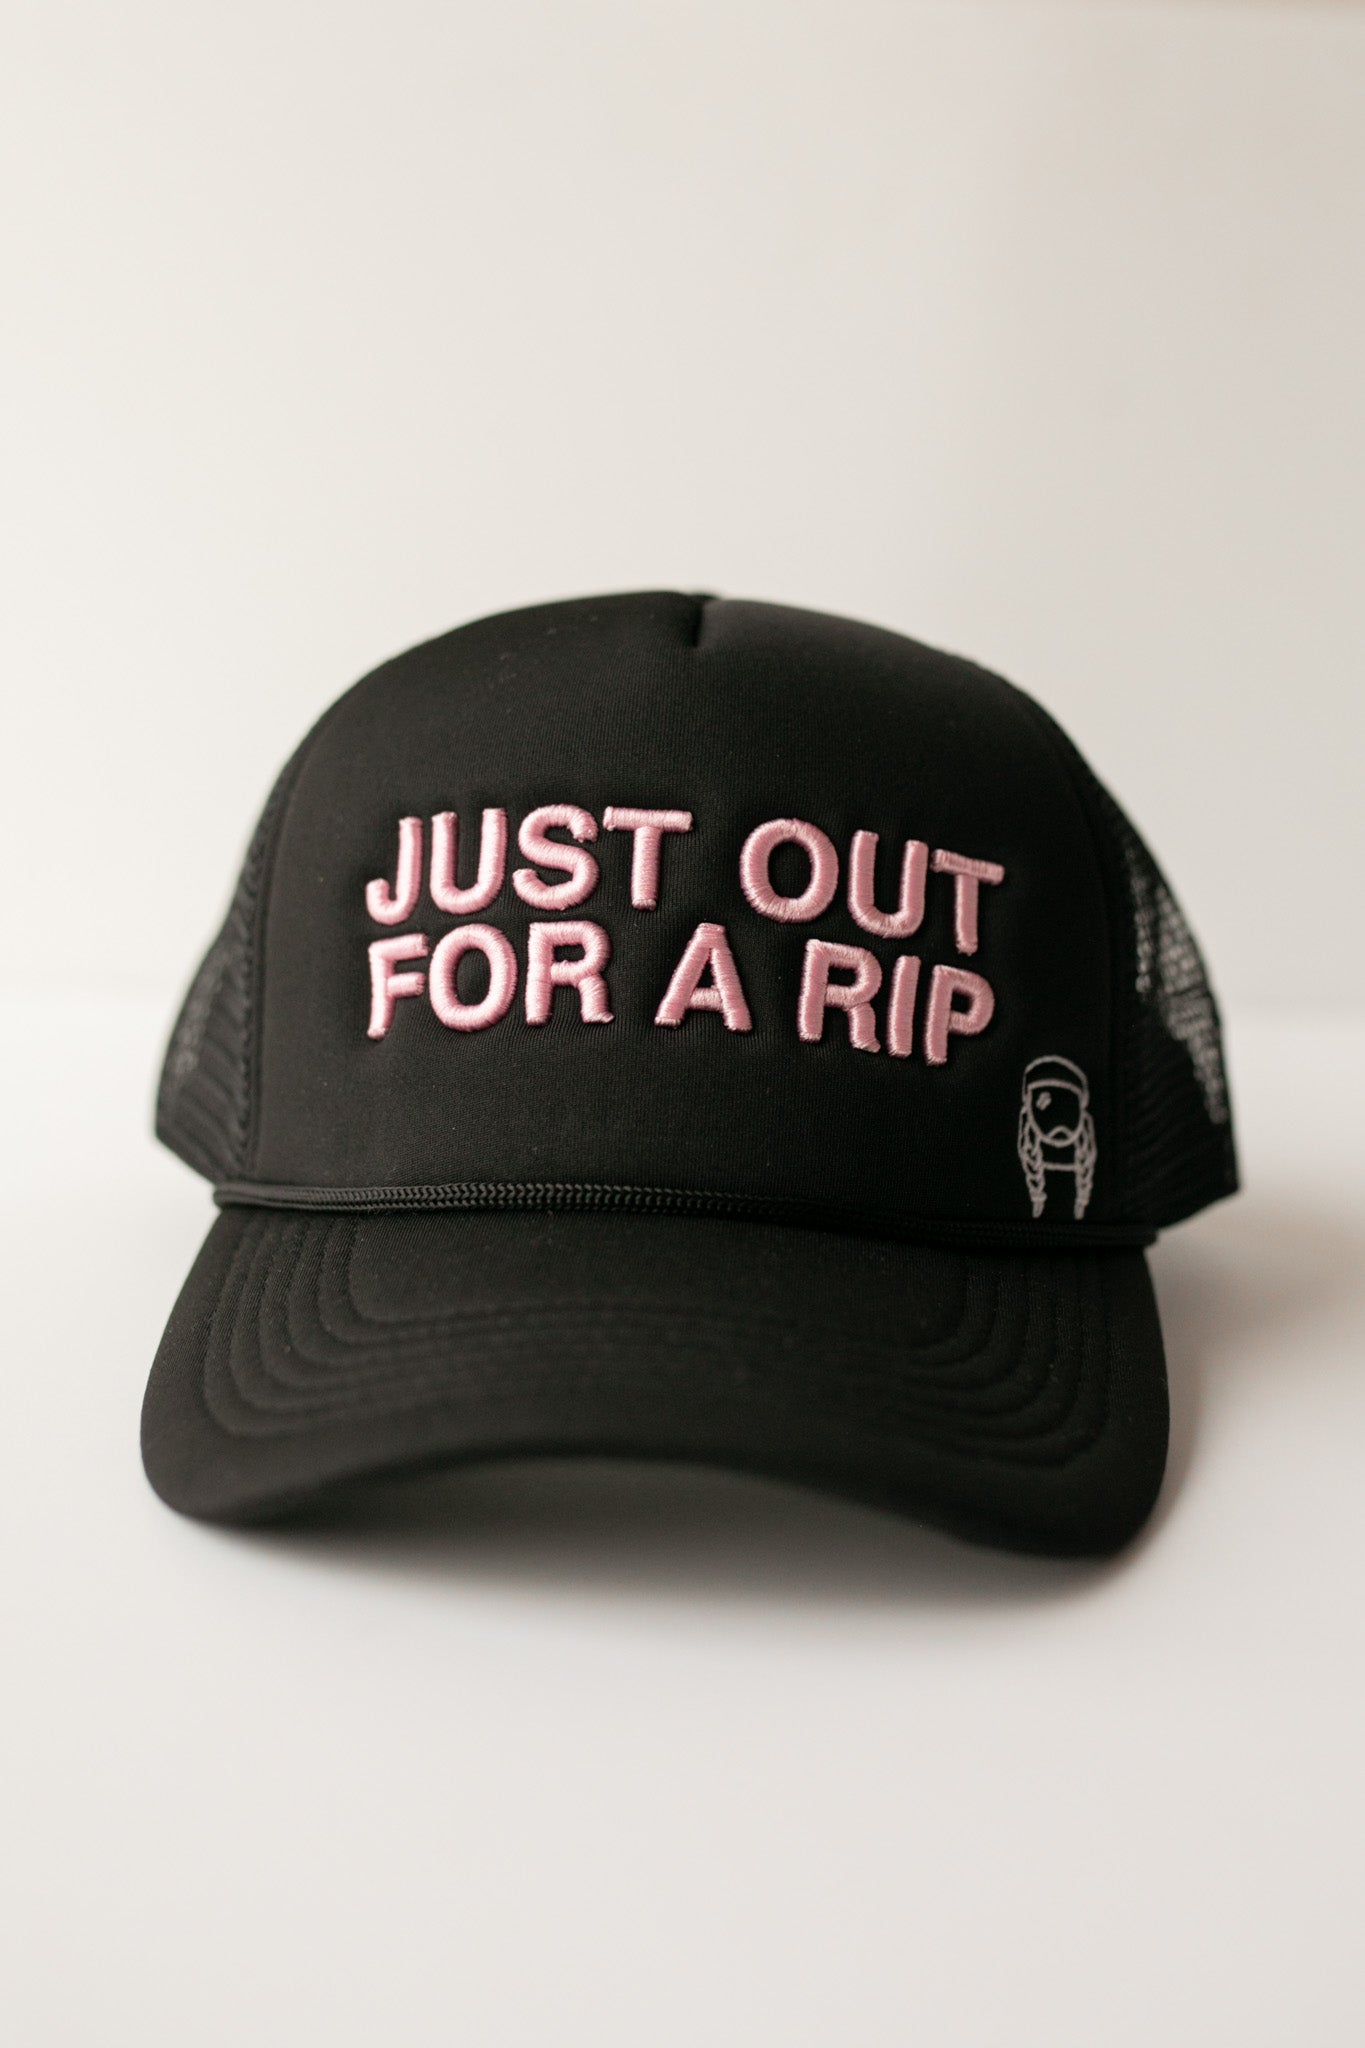 Just Out for a Rip Trucker Hat